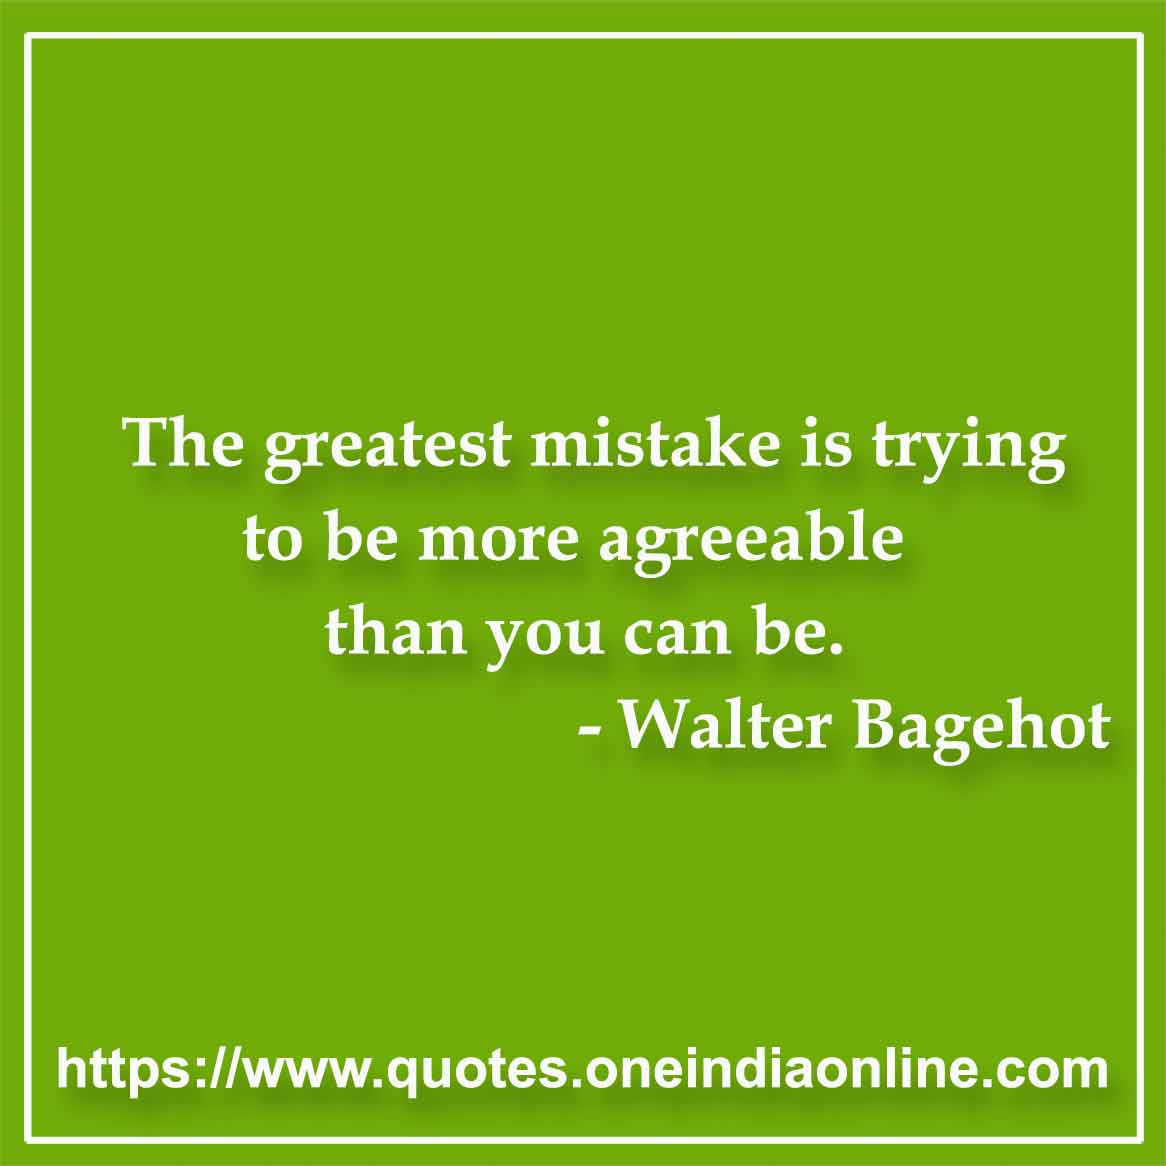 The greatest mistake is trying to be more agreeable than you can be.

- Walter Bagehot Quotes